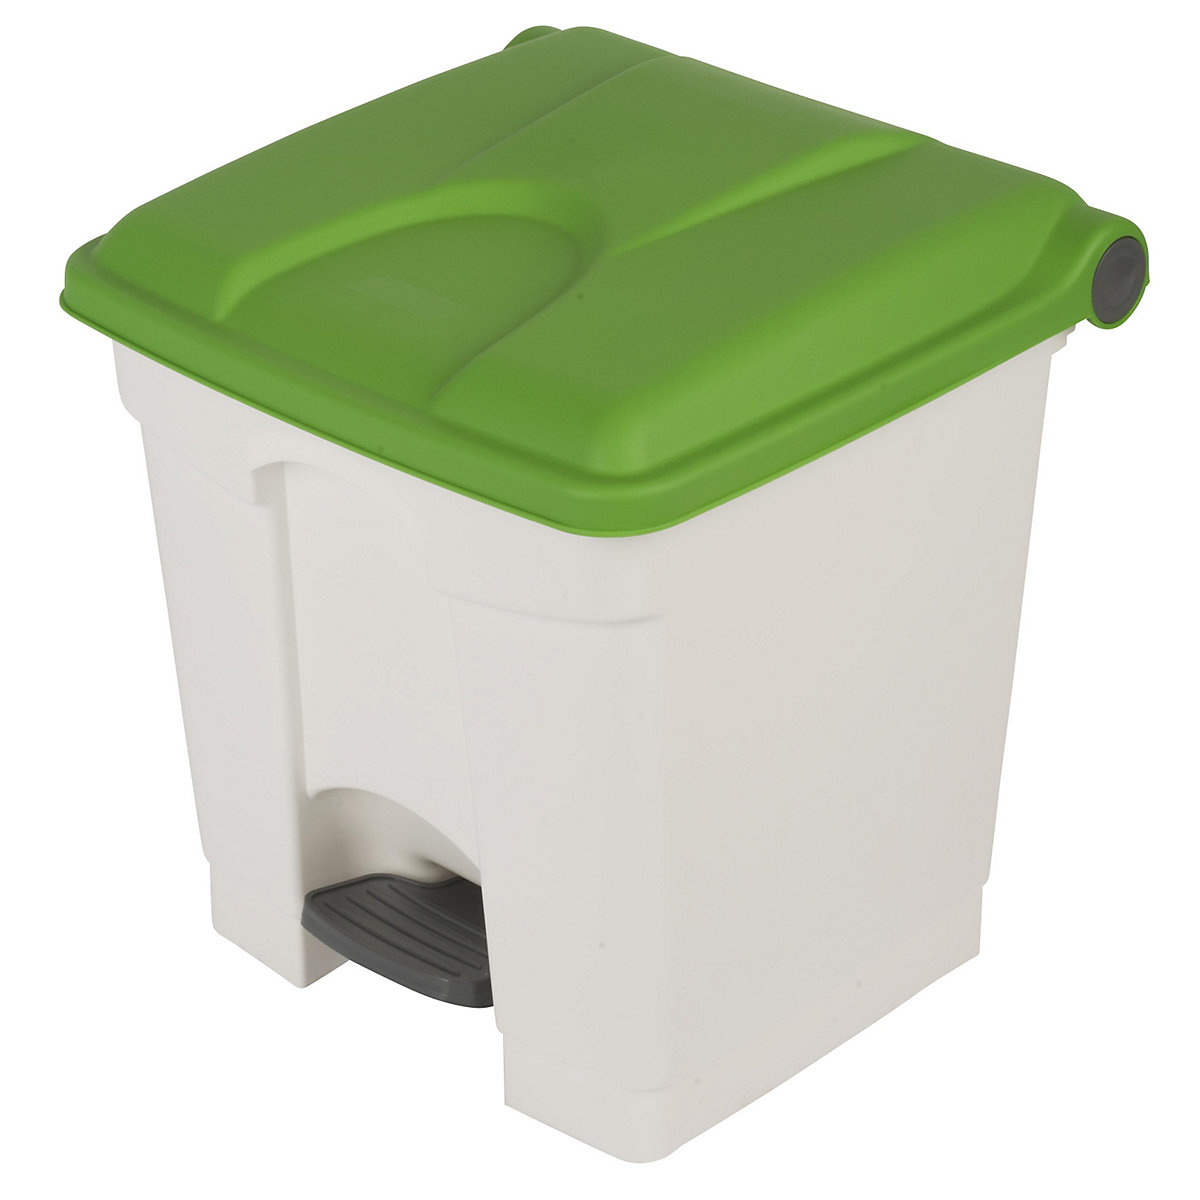 EUROKRAFTbasic – Pedal waste collector, capacity 30 l, WxHxD 410 x 435 x 400 mm, white, green lid